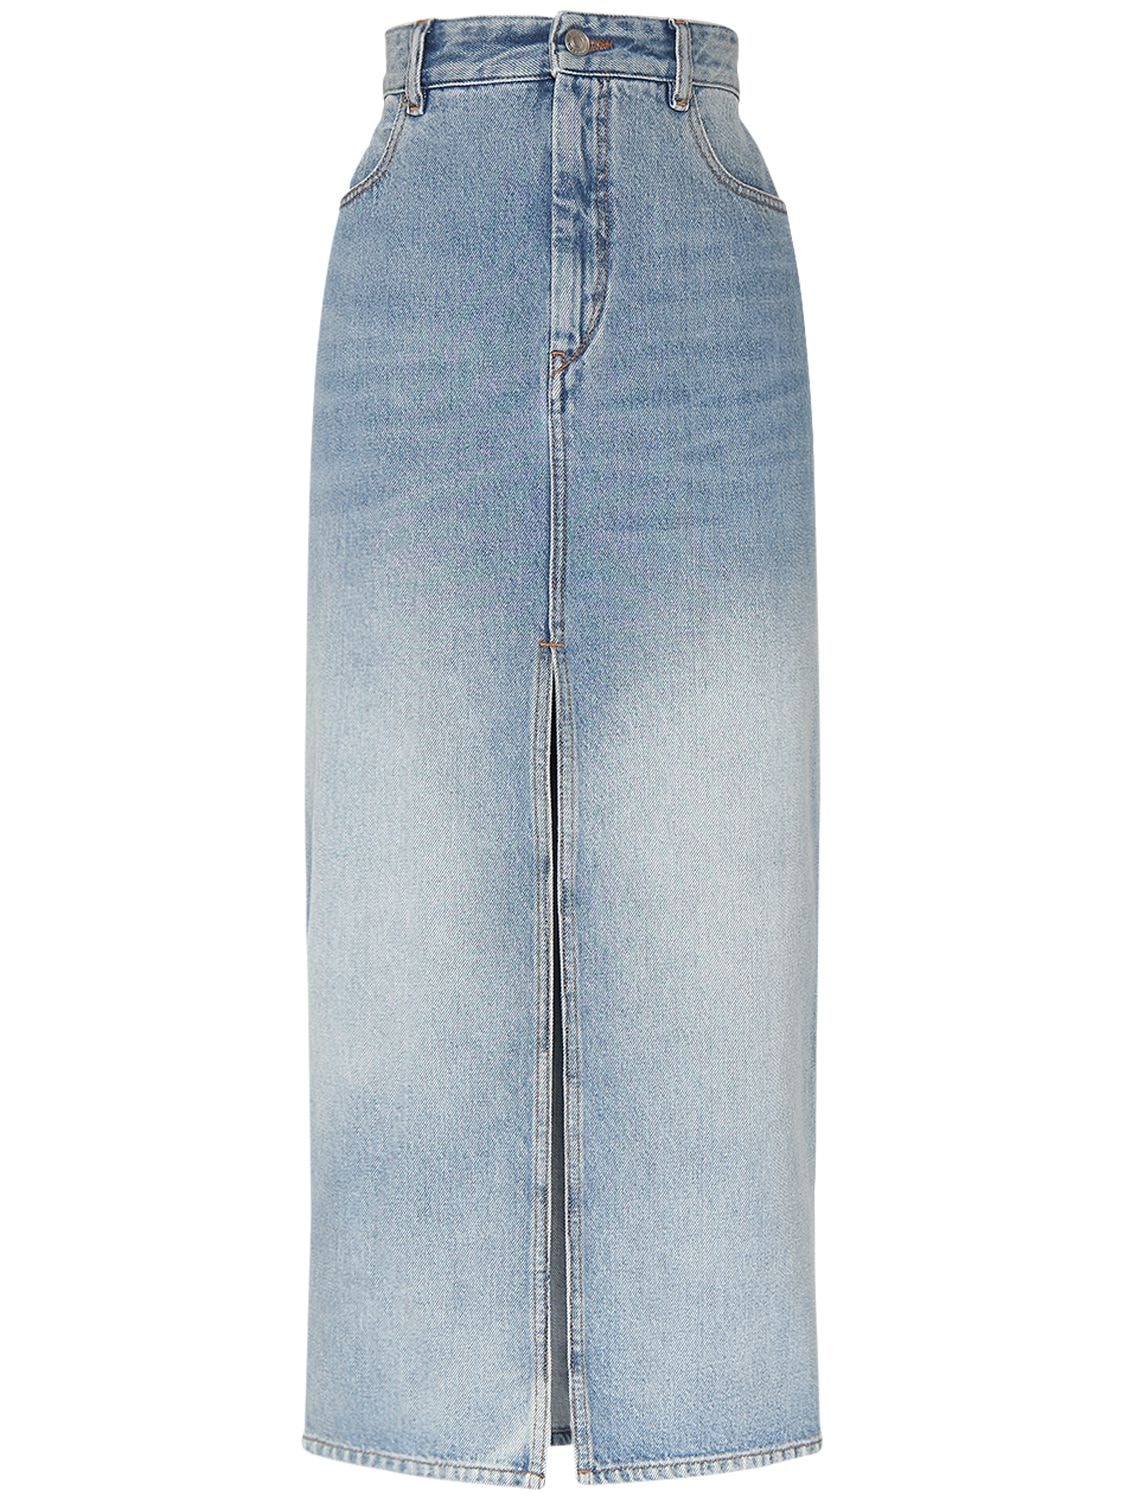 Isabel Marant Julicia Skirt In Ice Blue